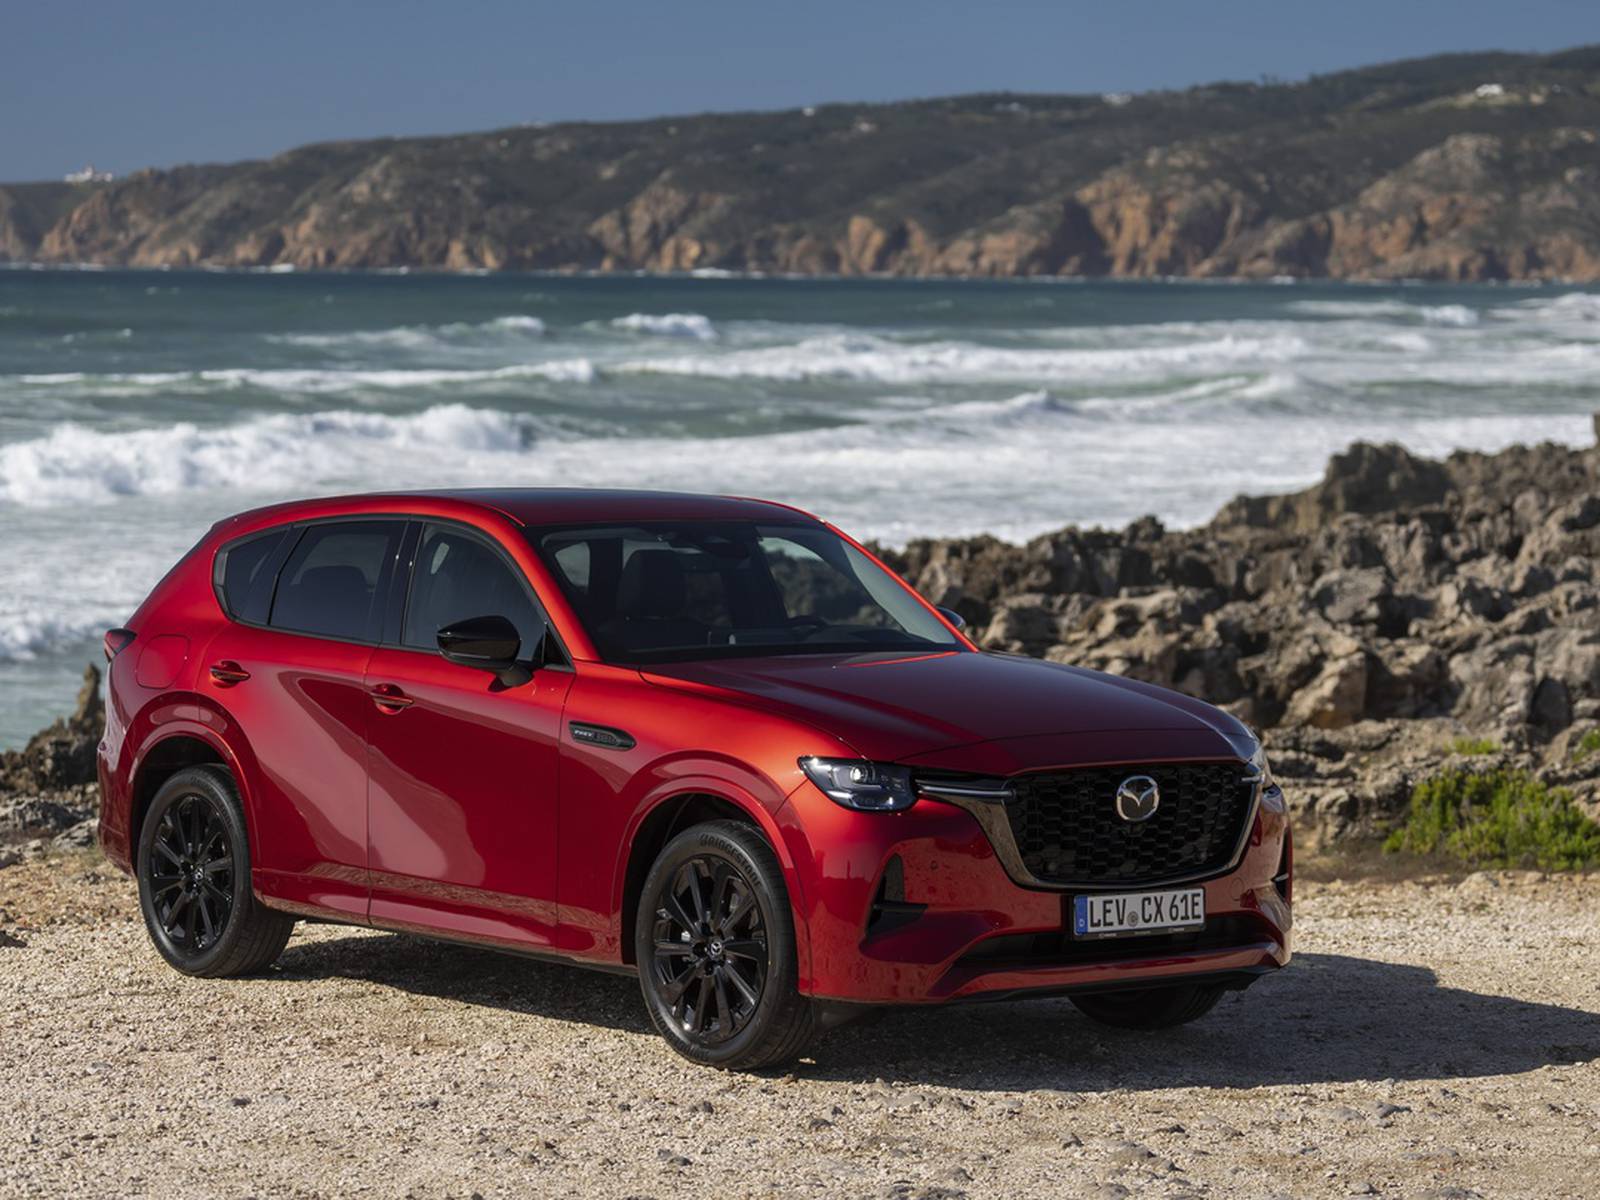 2022 Mazda CX-60 First Drive  Mazda's Most Powerful Car Ever Is A 188mpg  Plug-In Hybrid SUV! 